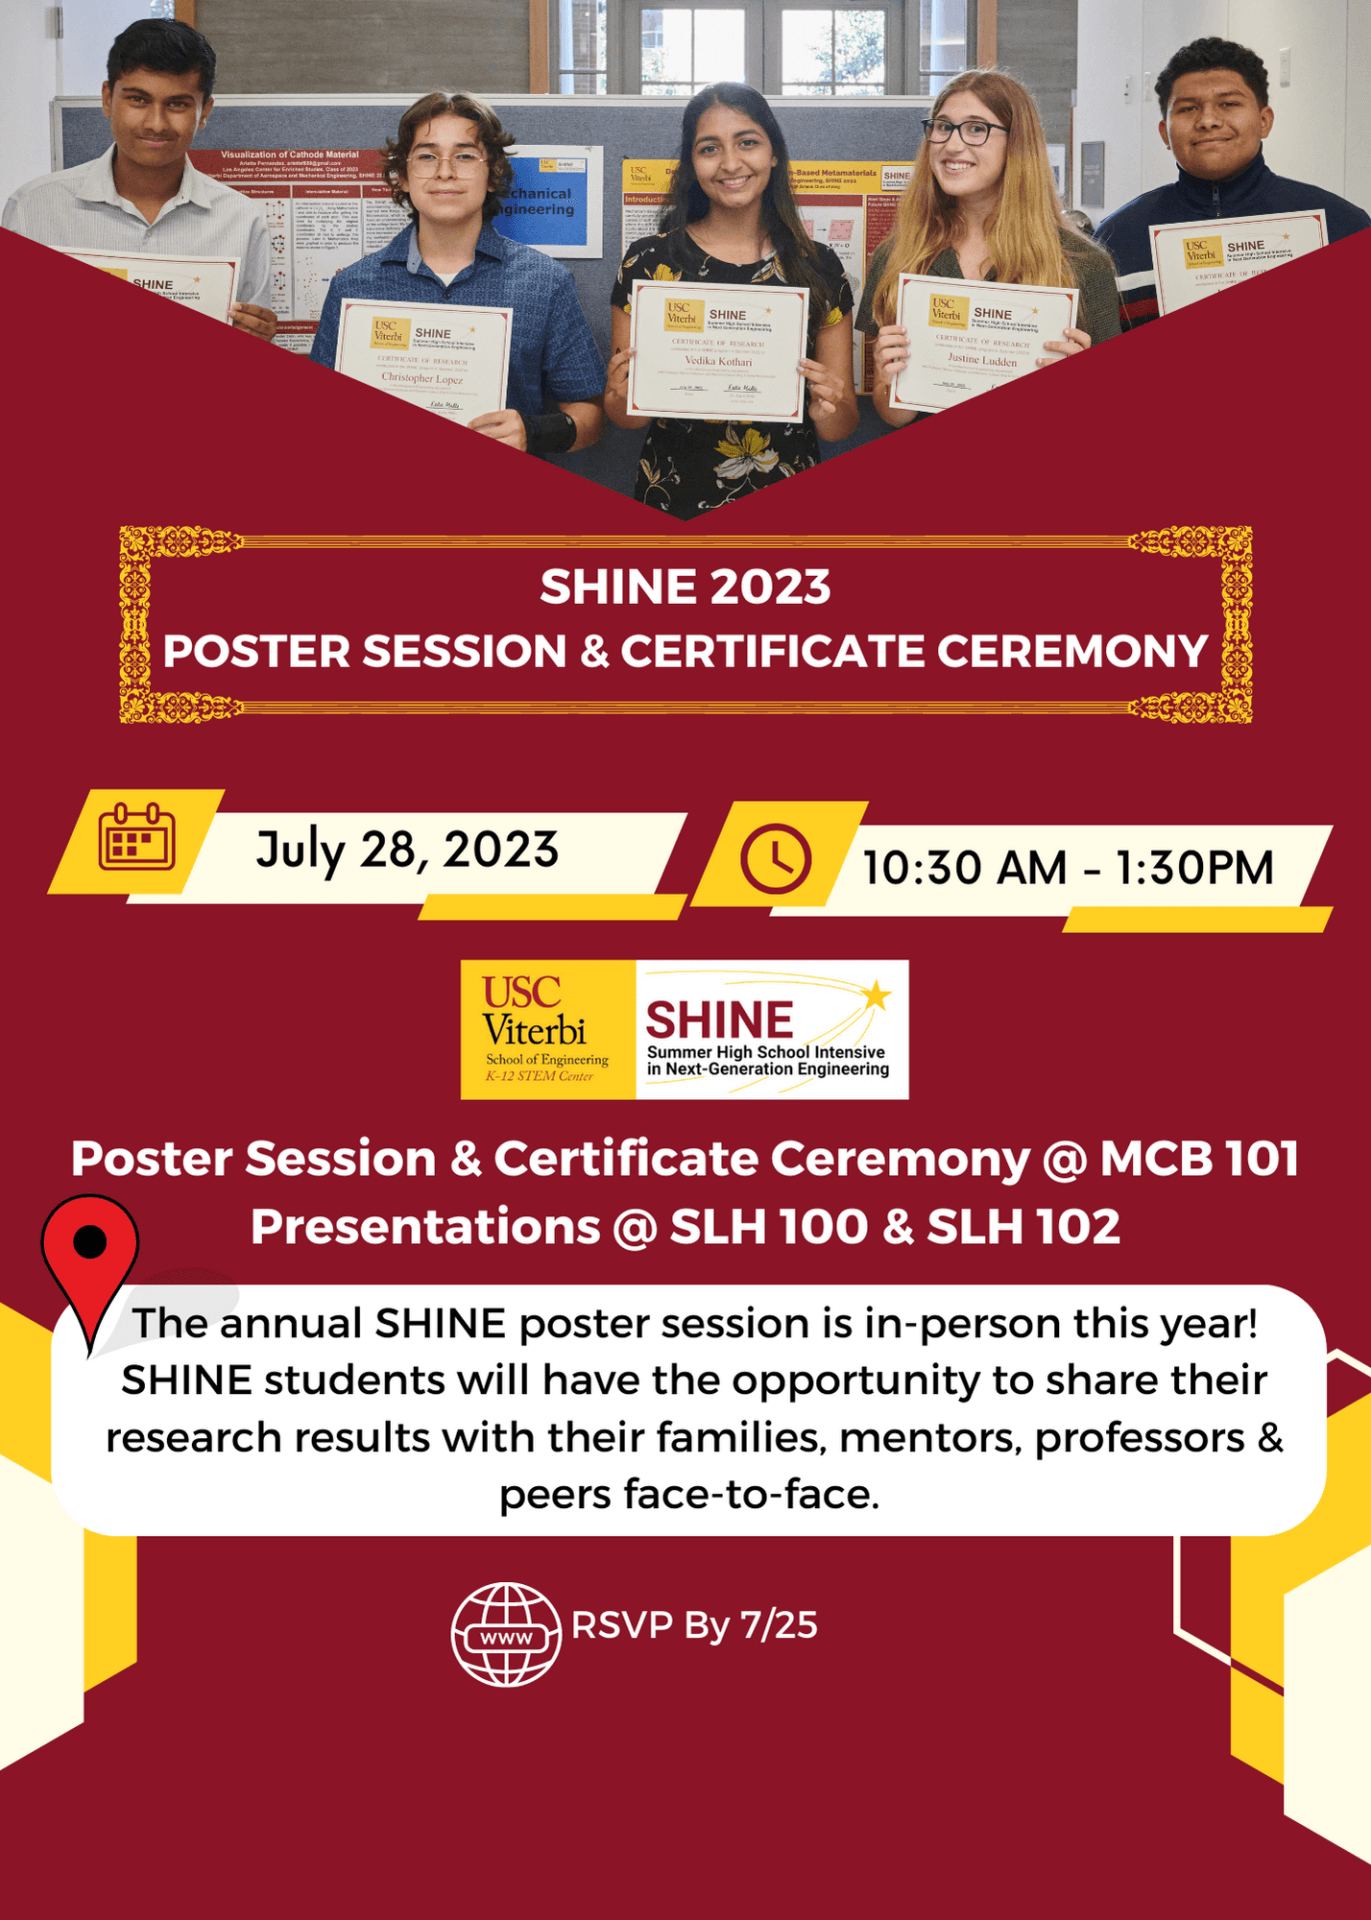 SHINE 2023 Poster Session July 28, 2023